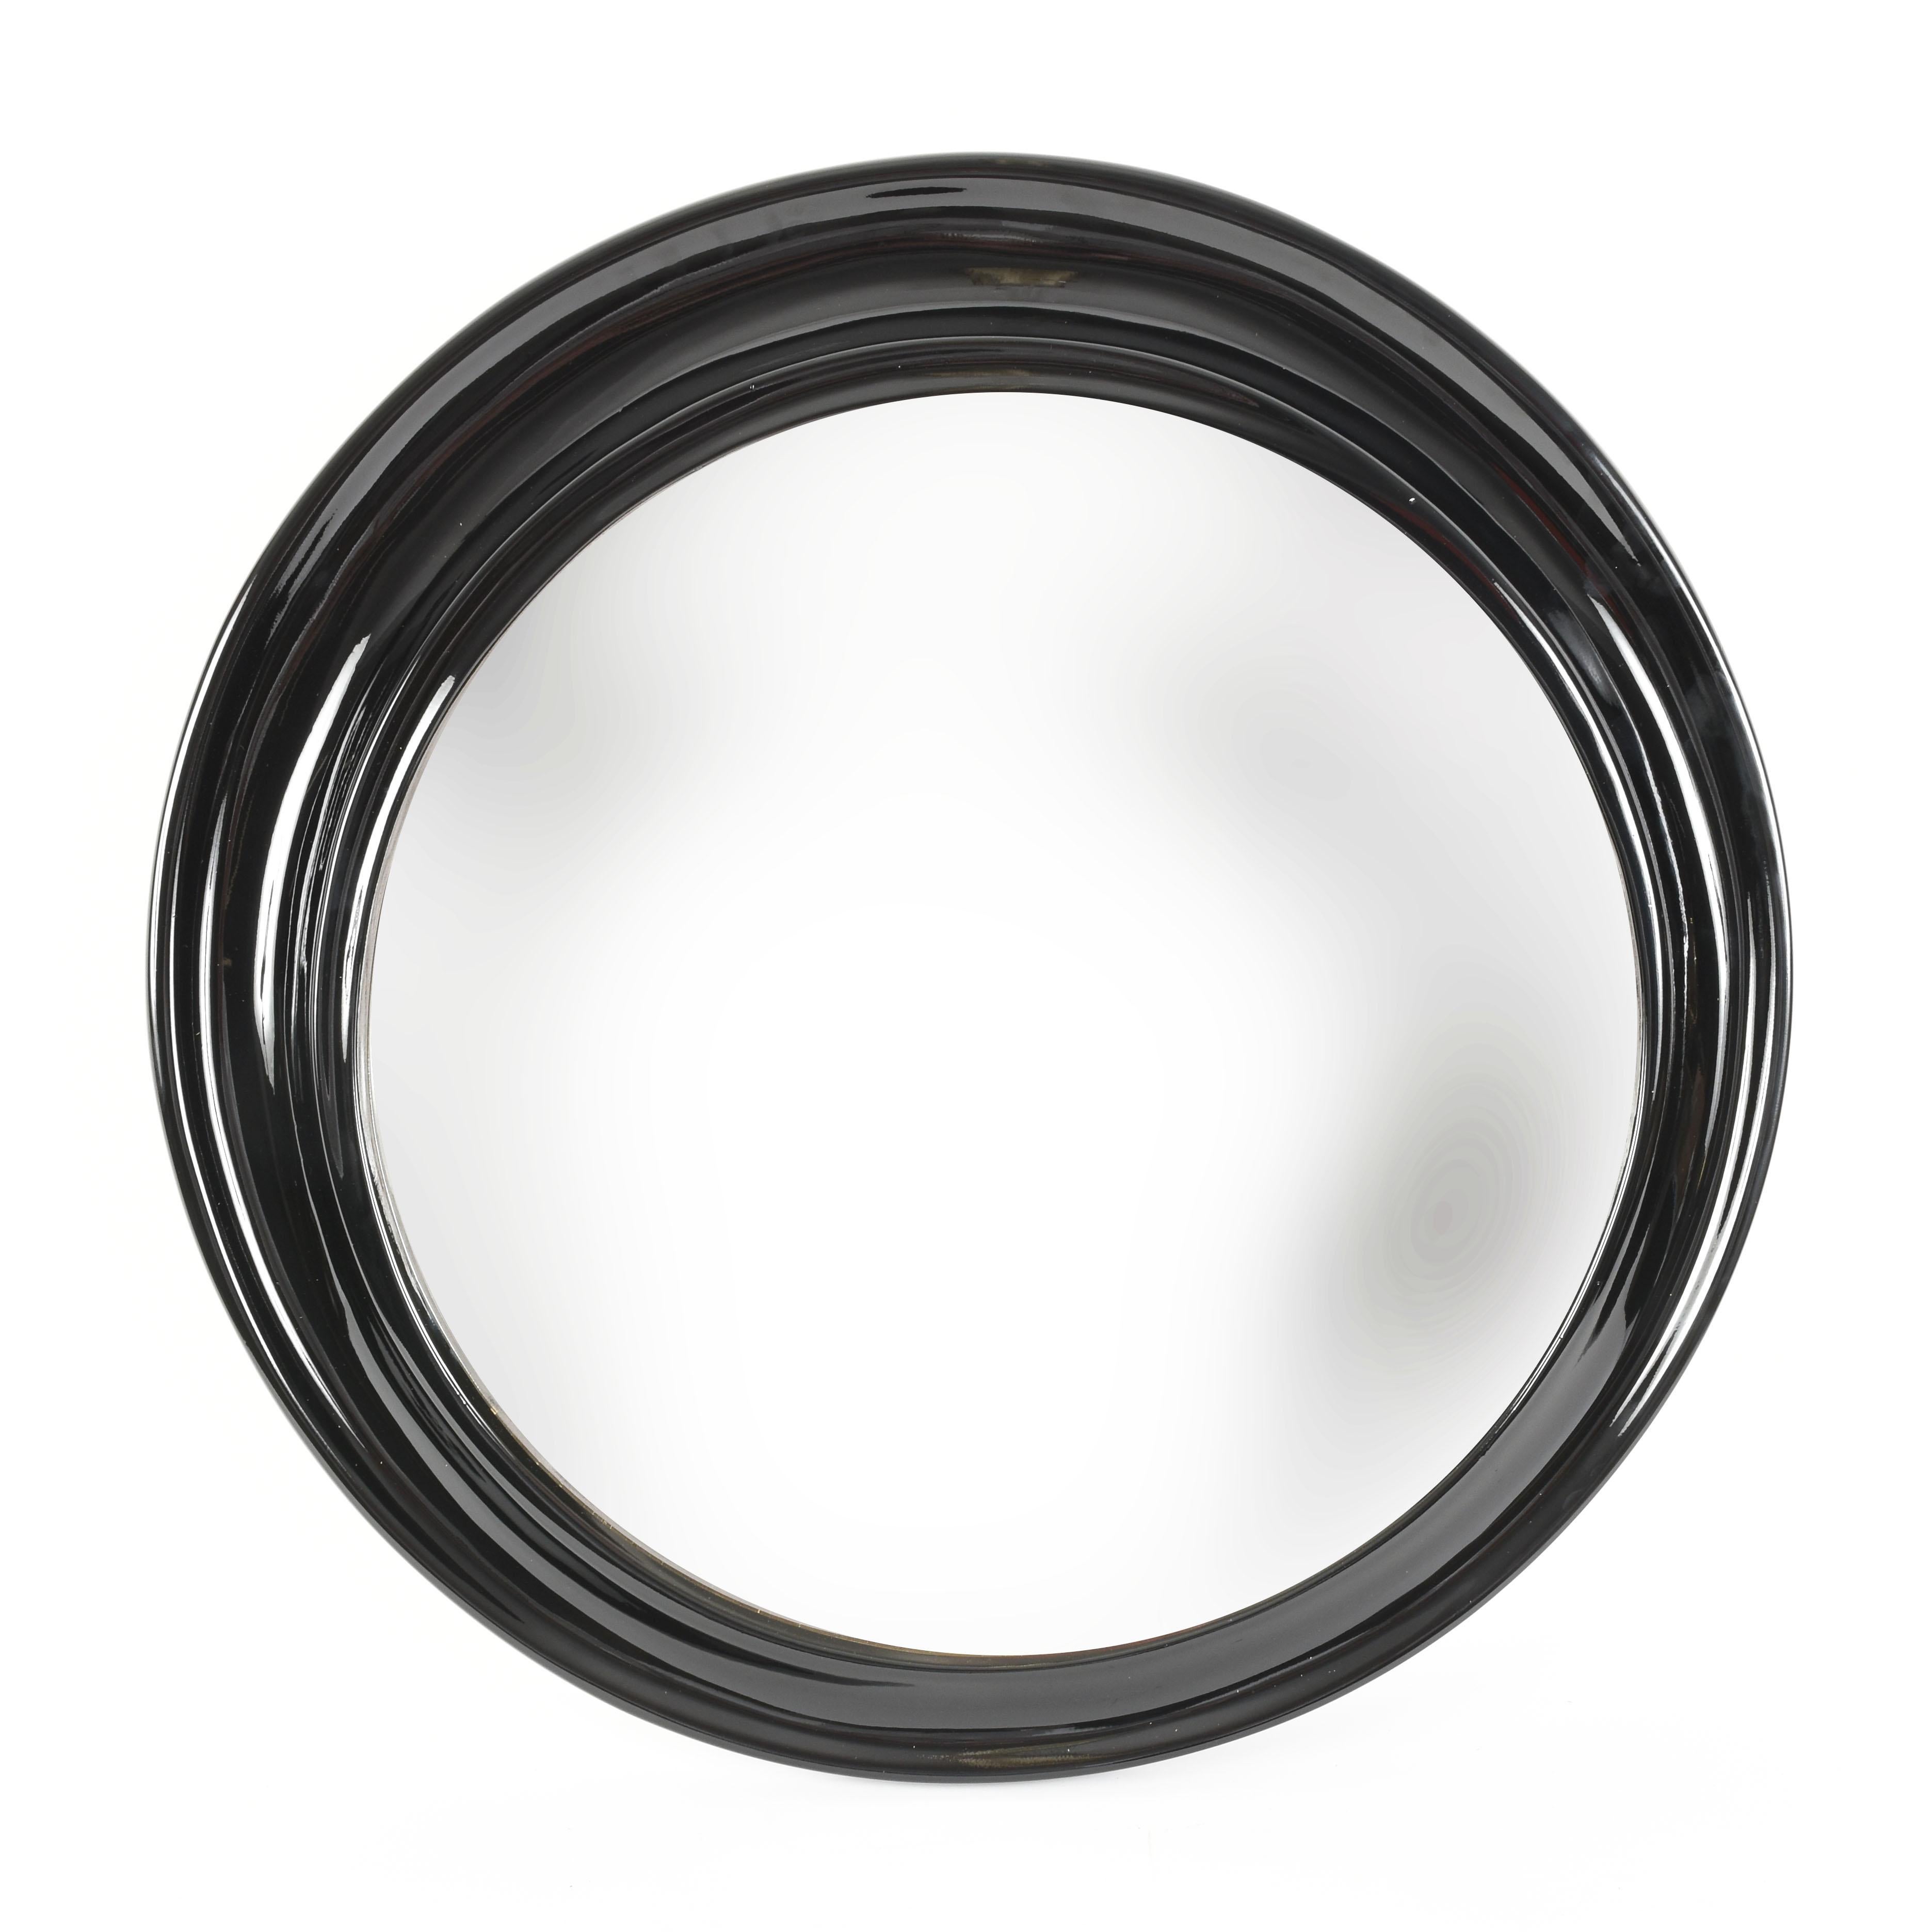 Mid-Century Modern Midcentury Round Italian Mirror with Black Lacquered Resin Frame, 1970s